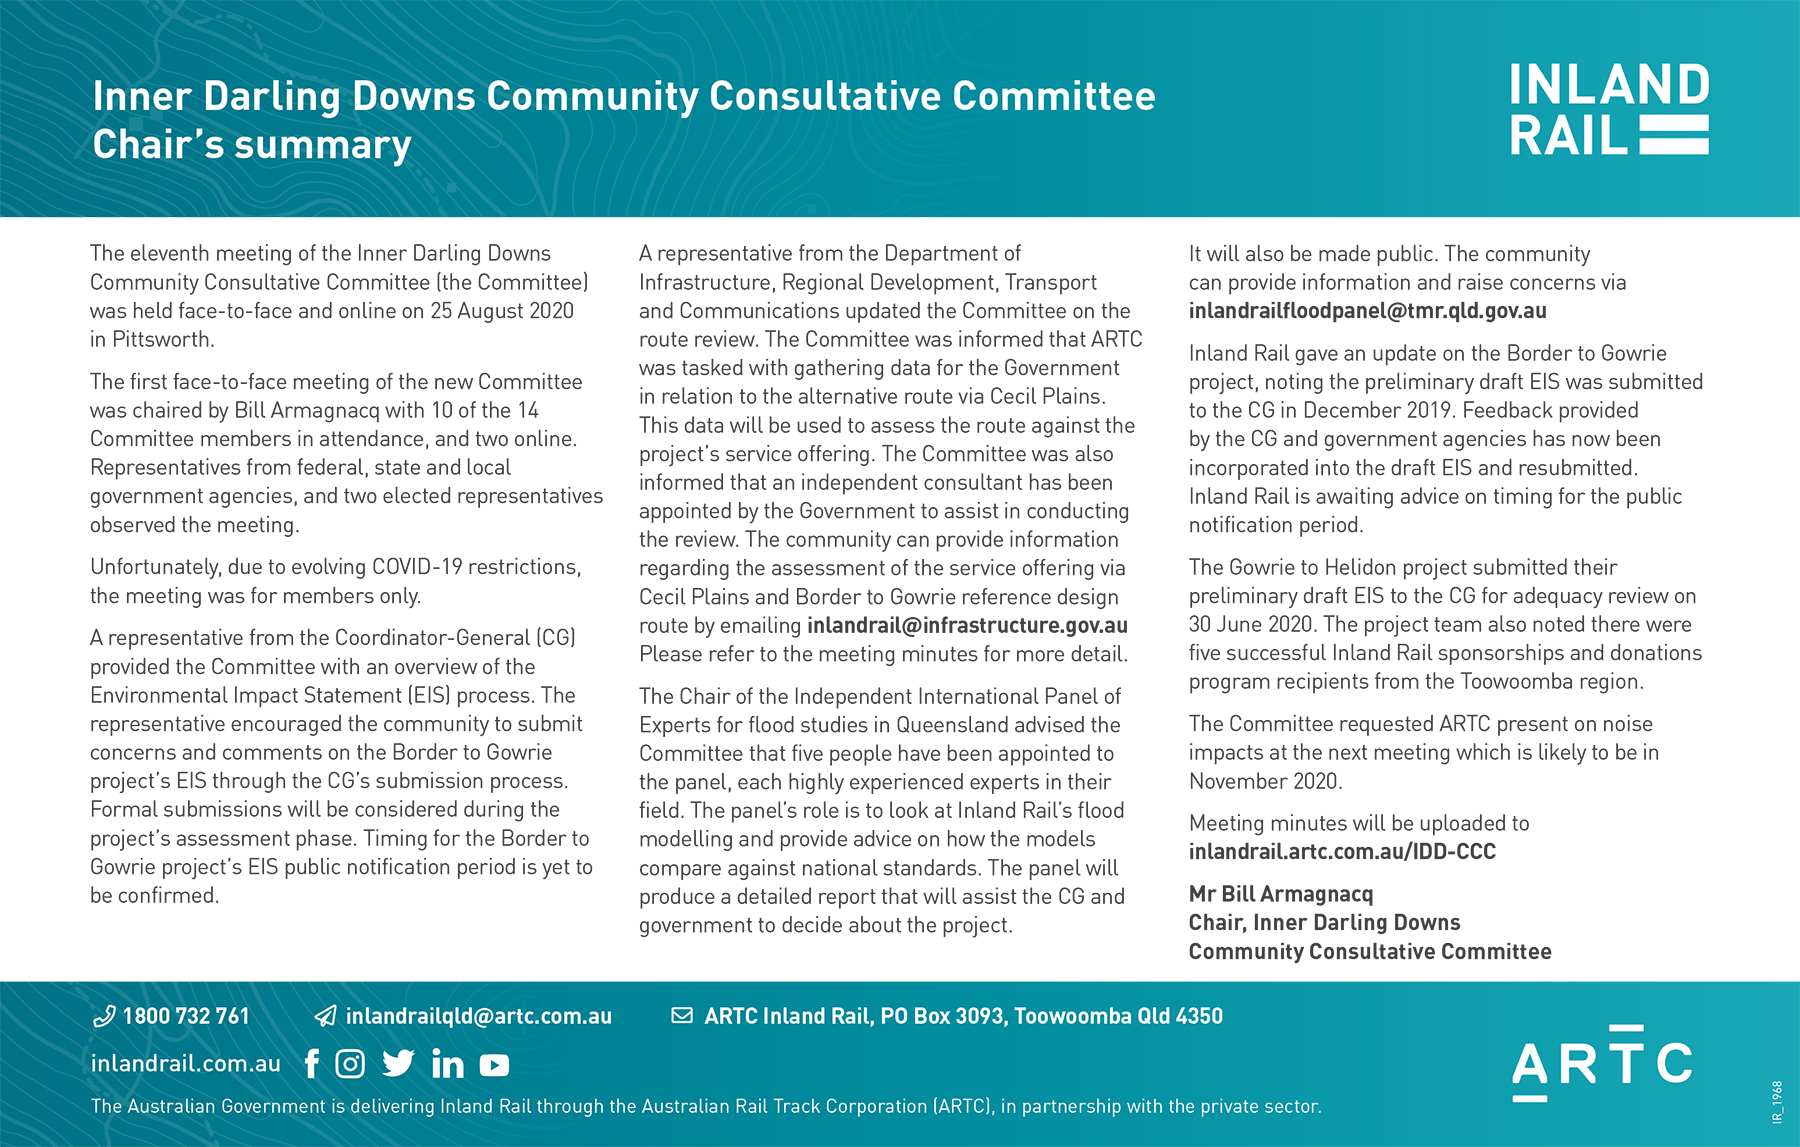 Inner Darling Downs Community Consultative Commtitee Chair's sum